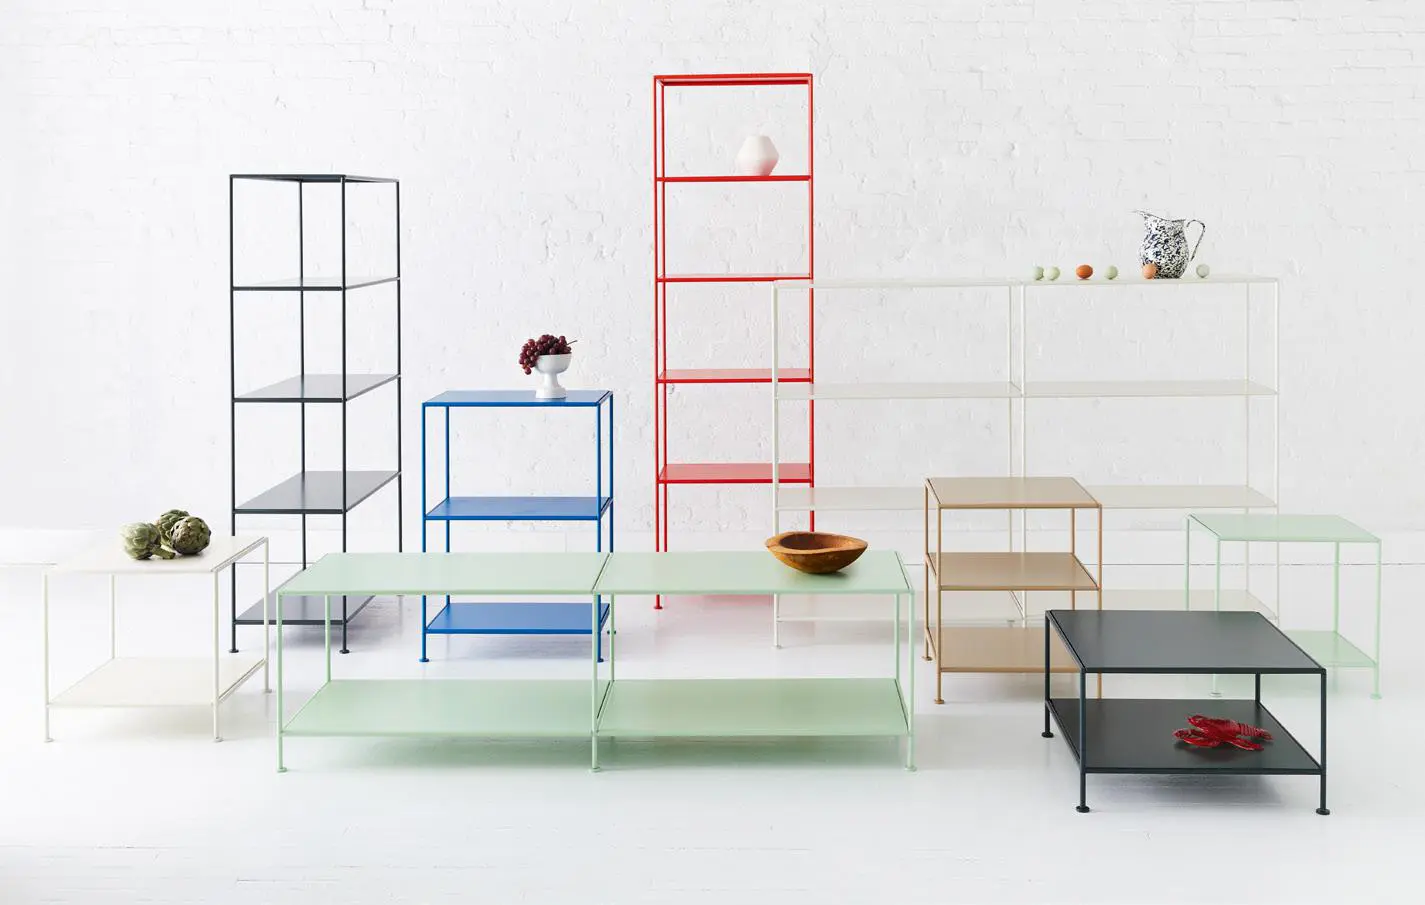 Stille, the effortless shelving by Standard issue